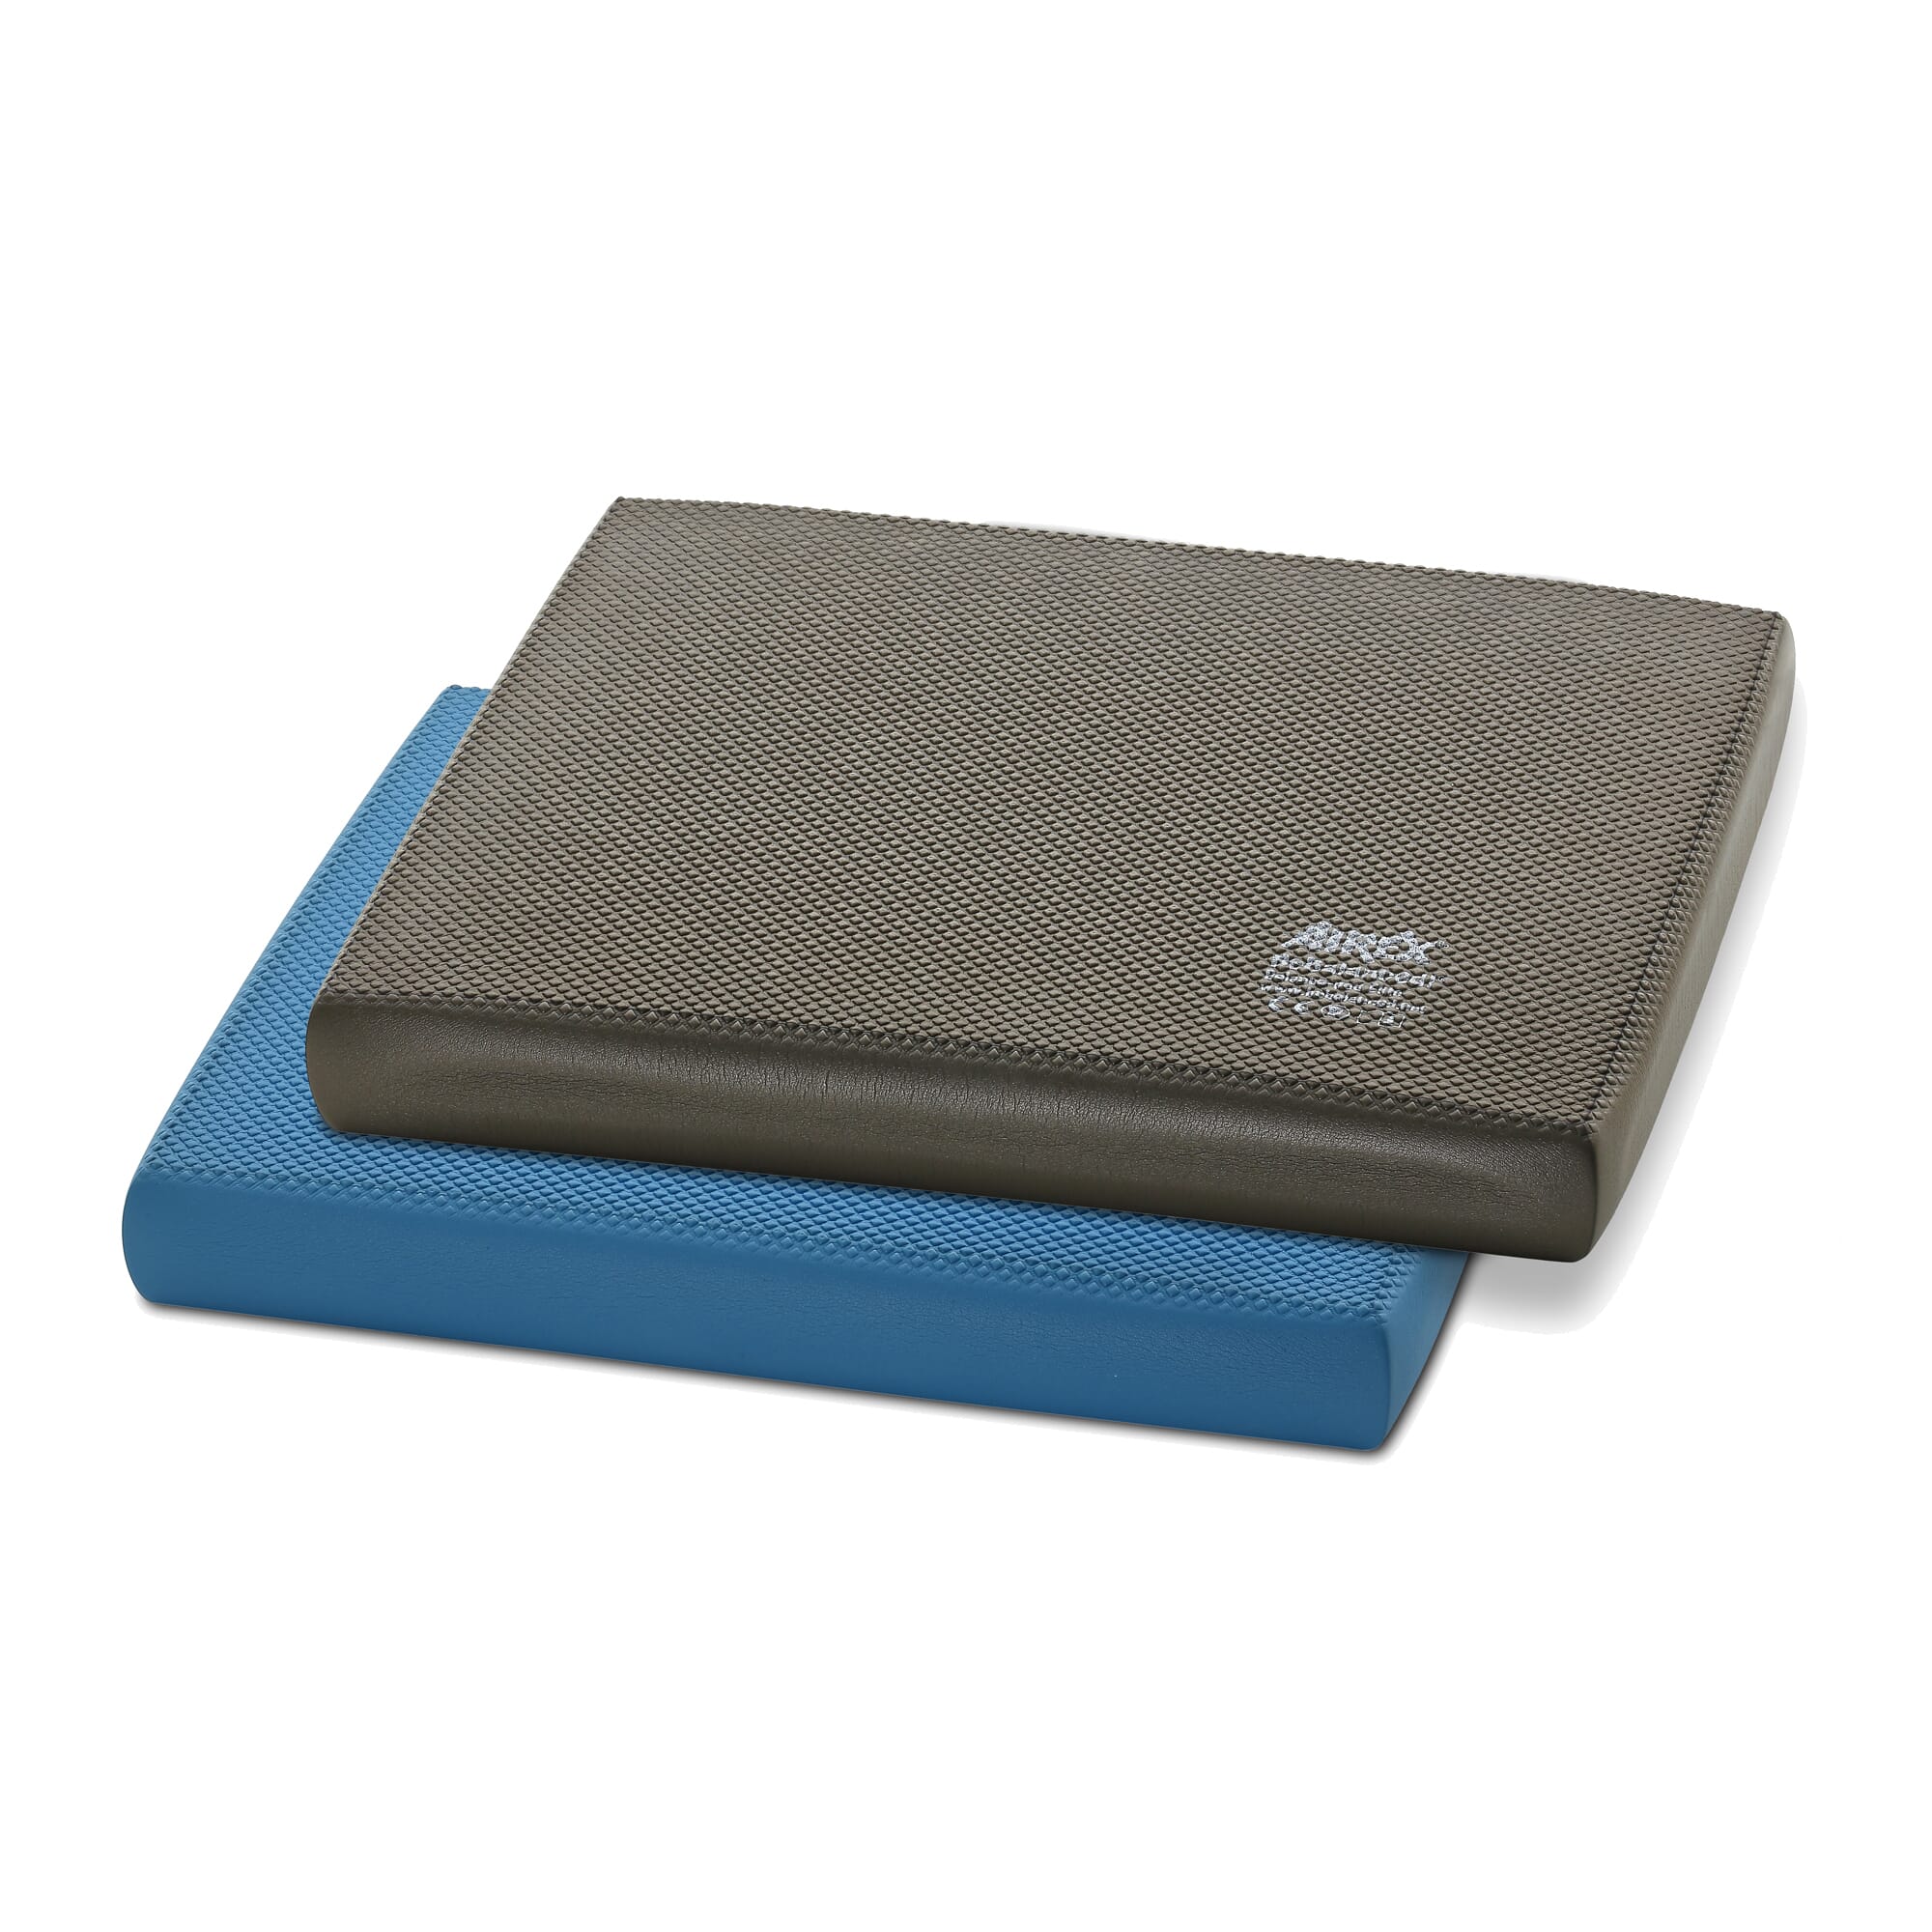 Airex Balance Pads - Buy online at Physical Company